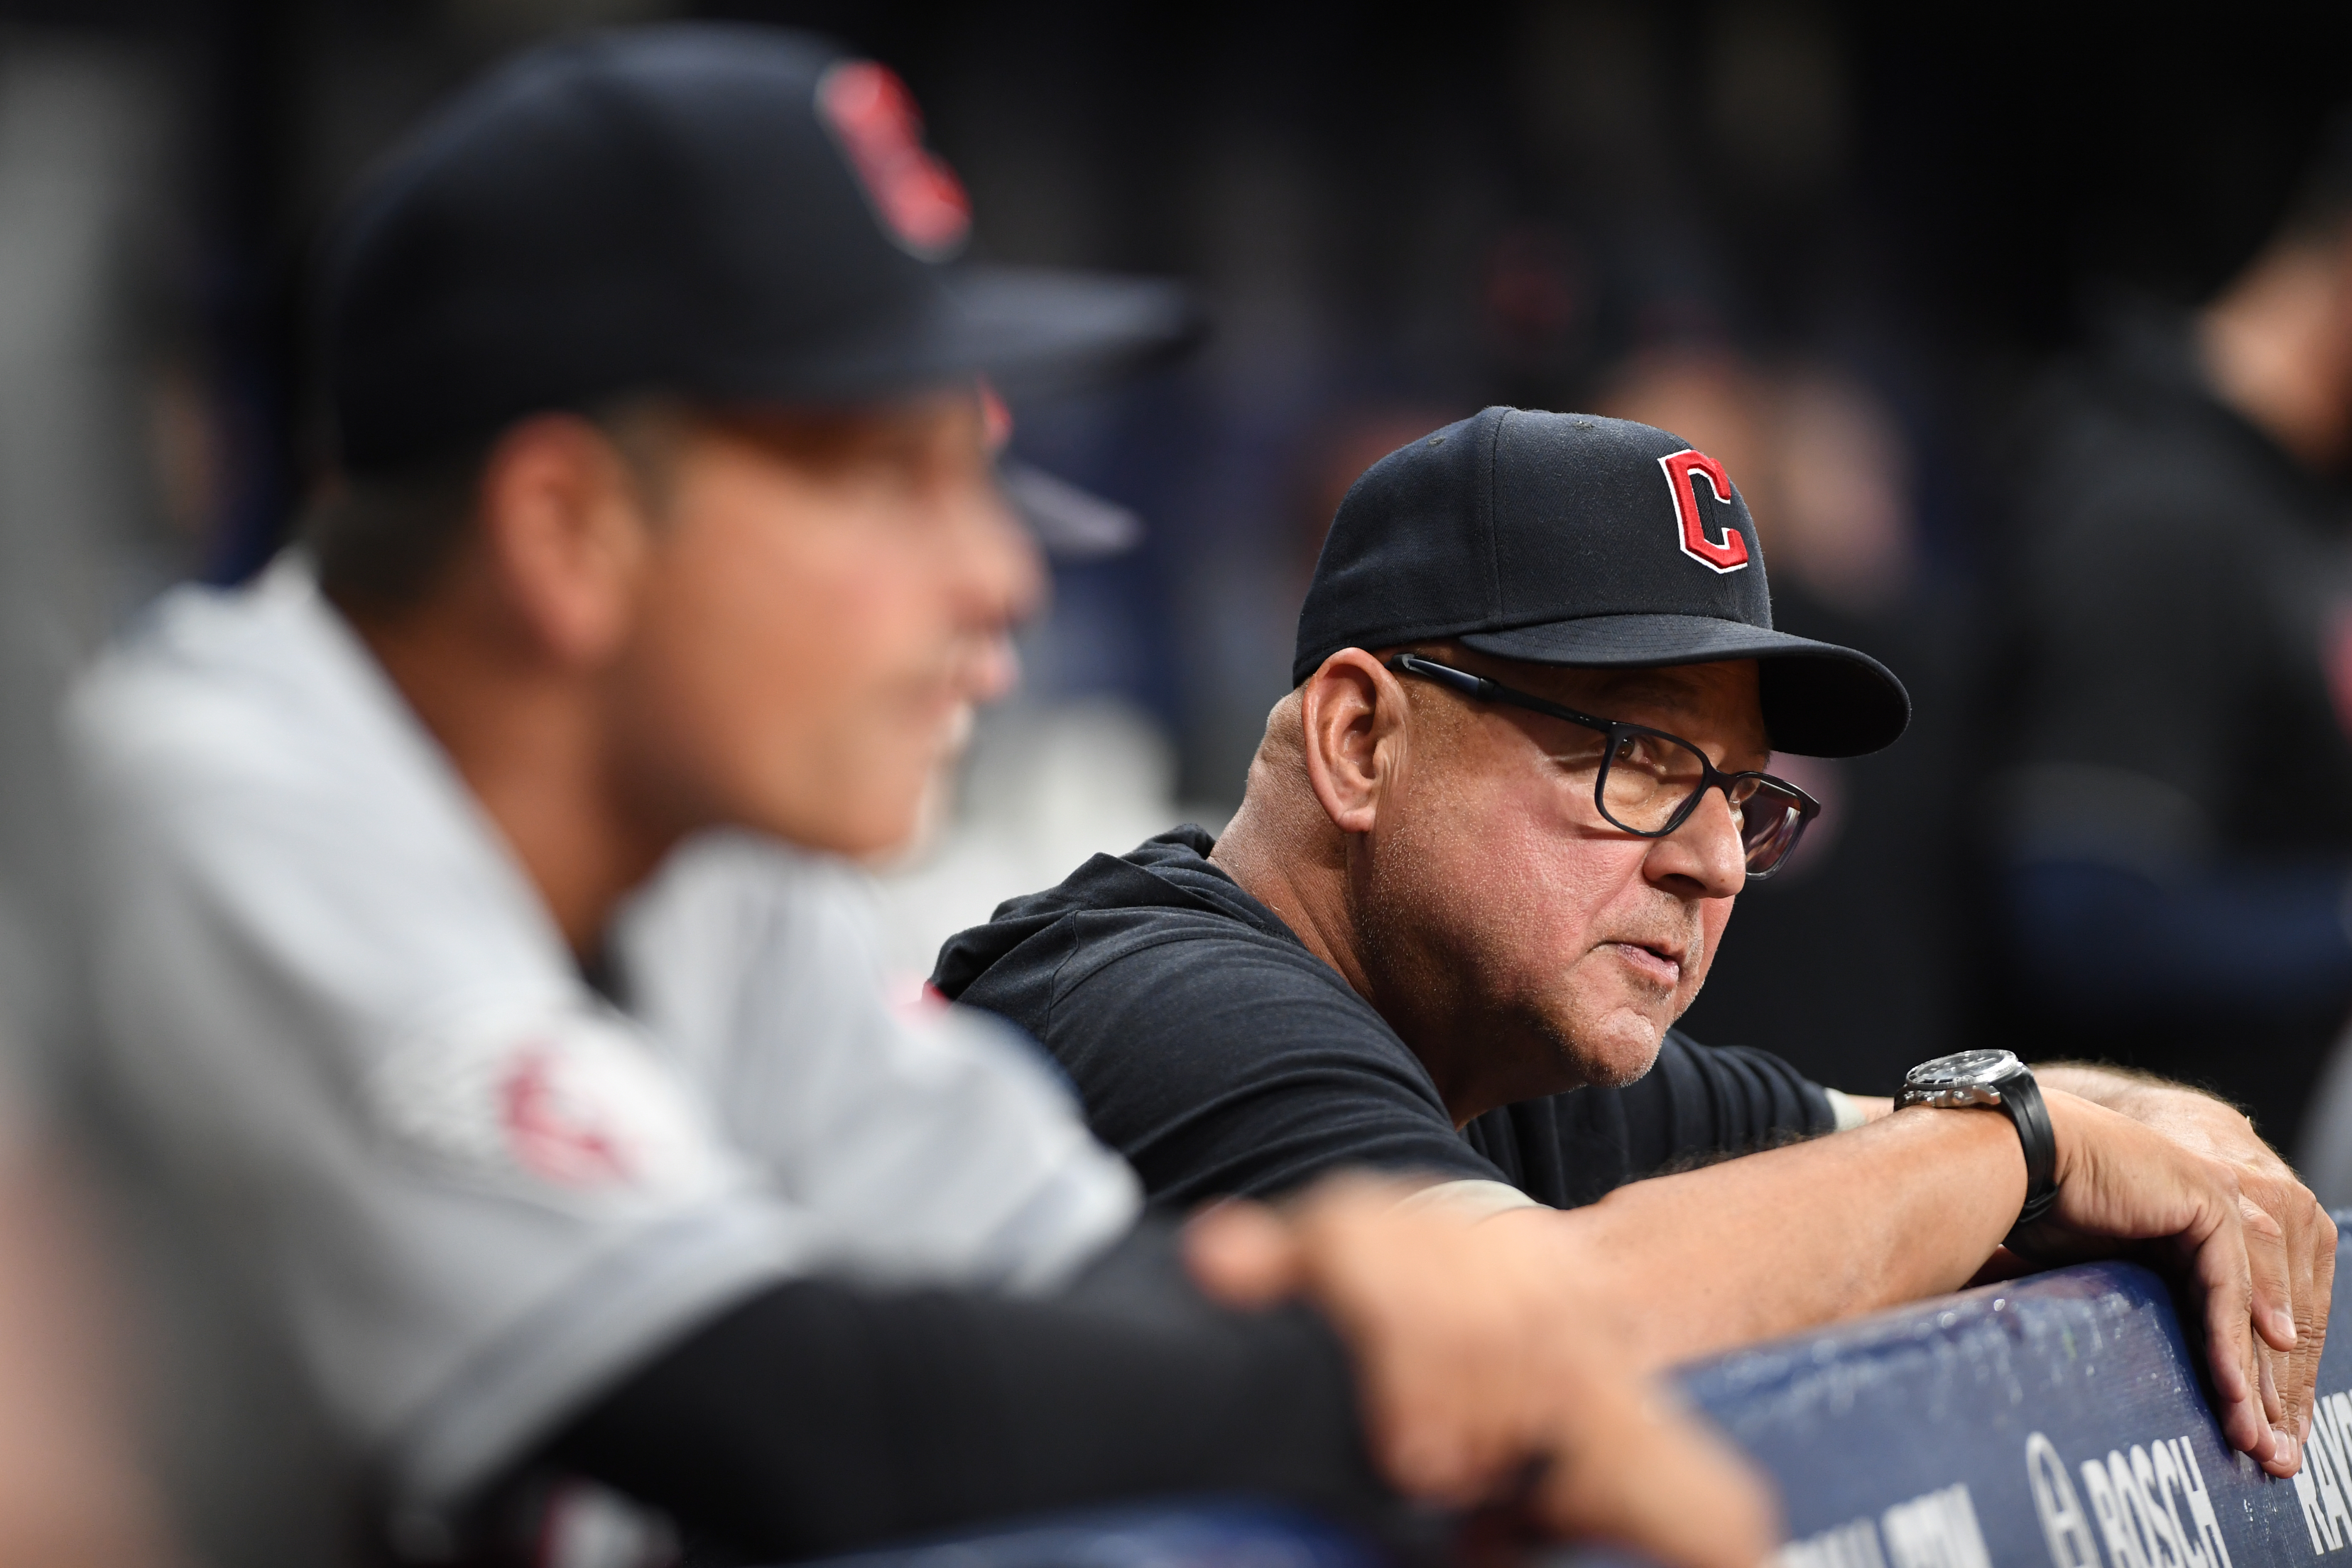 Terry Francona is mulling retirement after 'serious talks' with Guardians  about his future as manager - The Boston Globe